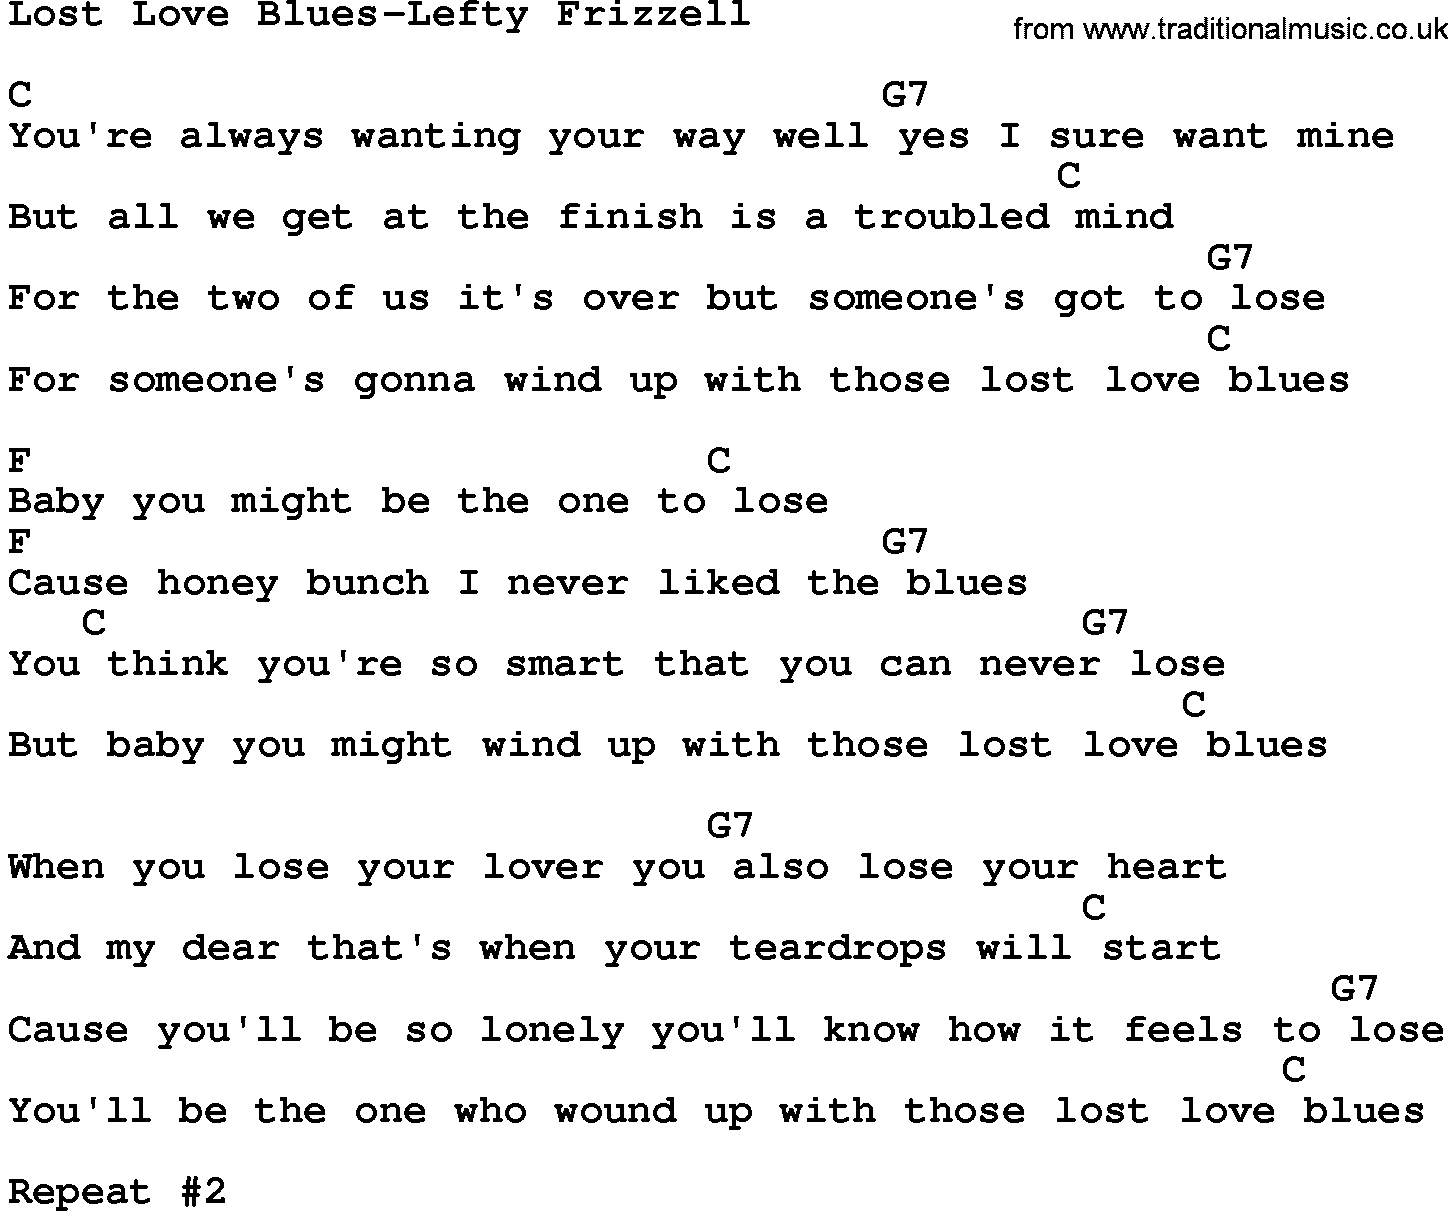 Country music song: Lost Love Blues-Lefty Frizzell lyrics and chords